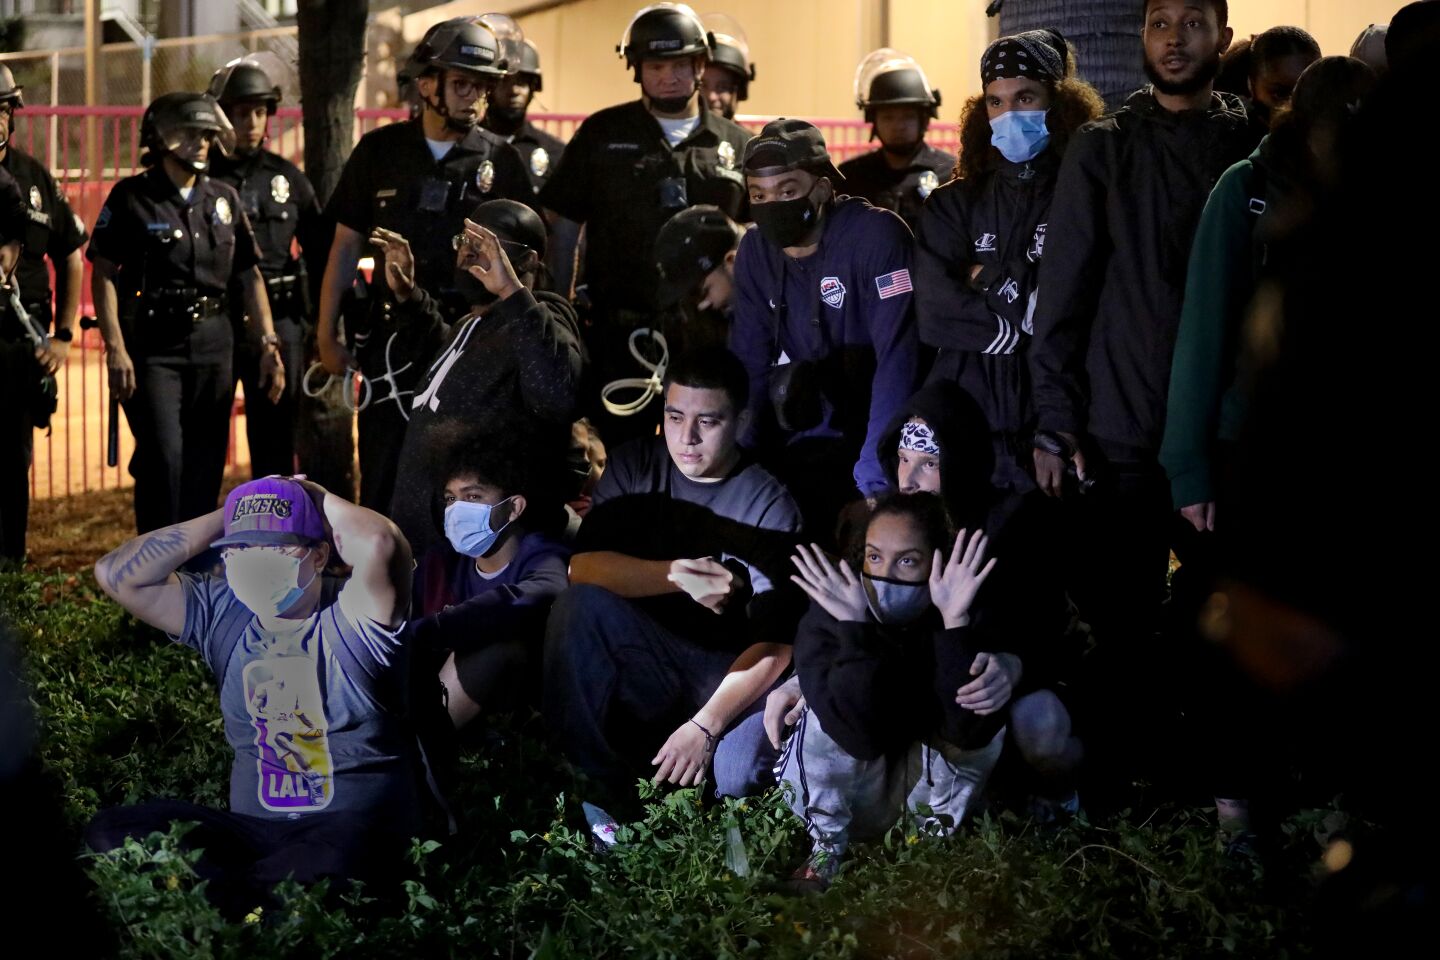 Protesters are arrested by Los Angeles police in front of City Hall on Saturday.